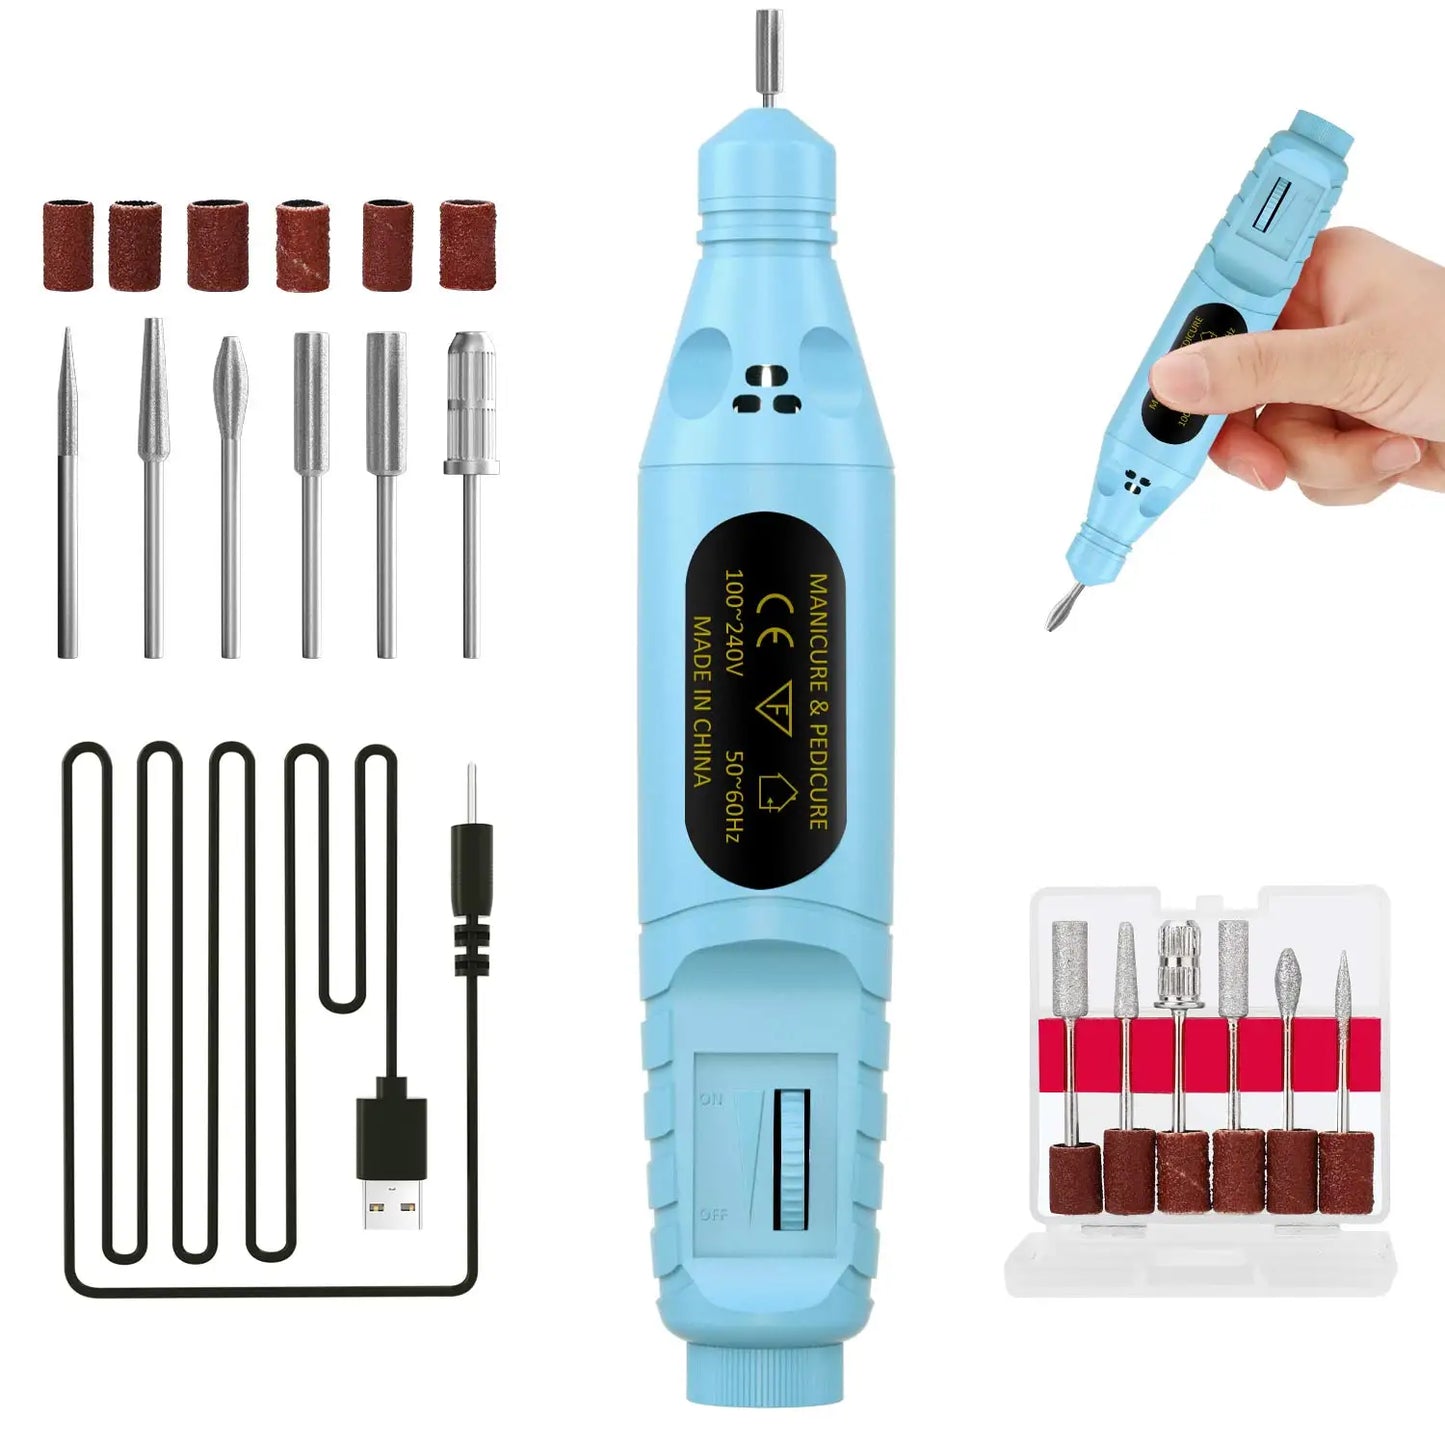 1 Set Professional Electric Nail Drill Machine Manicure Milling Cutter Nail Art File Grinder Grooming Kits Nail Polish Remover - naiveniche